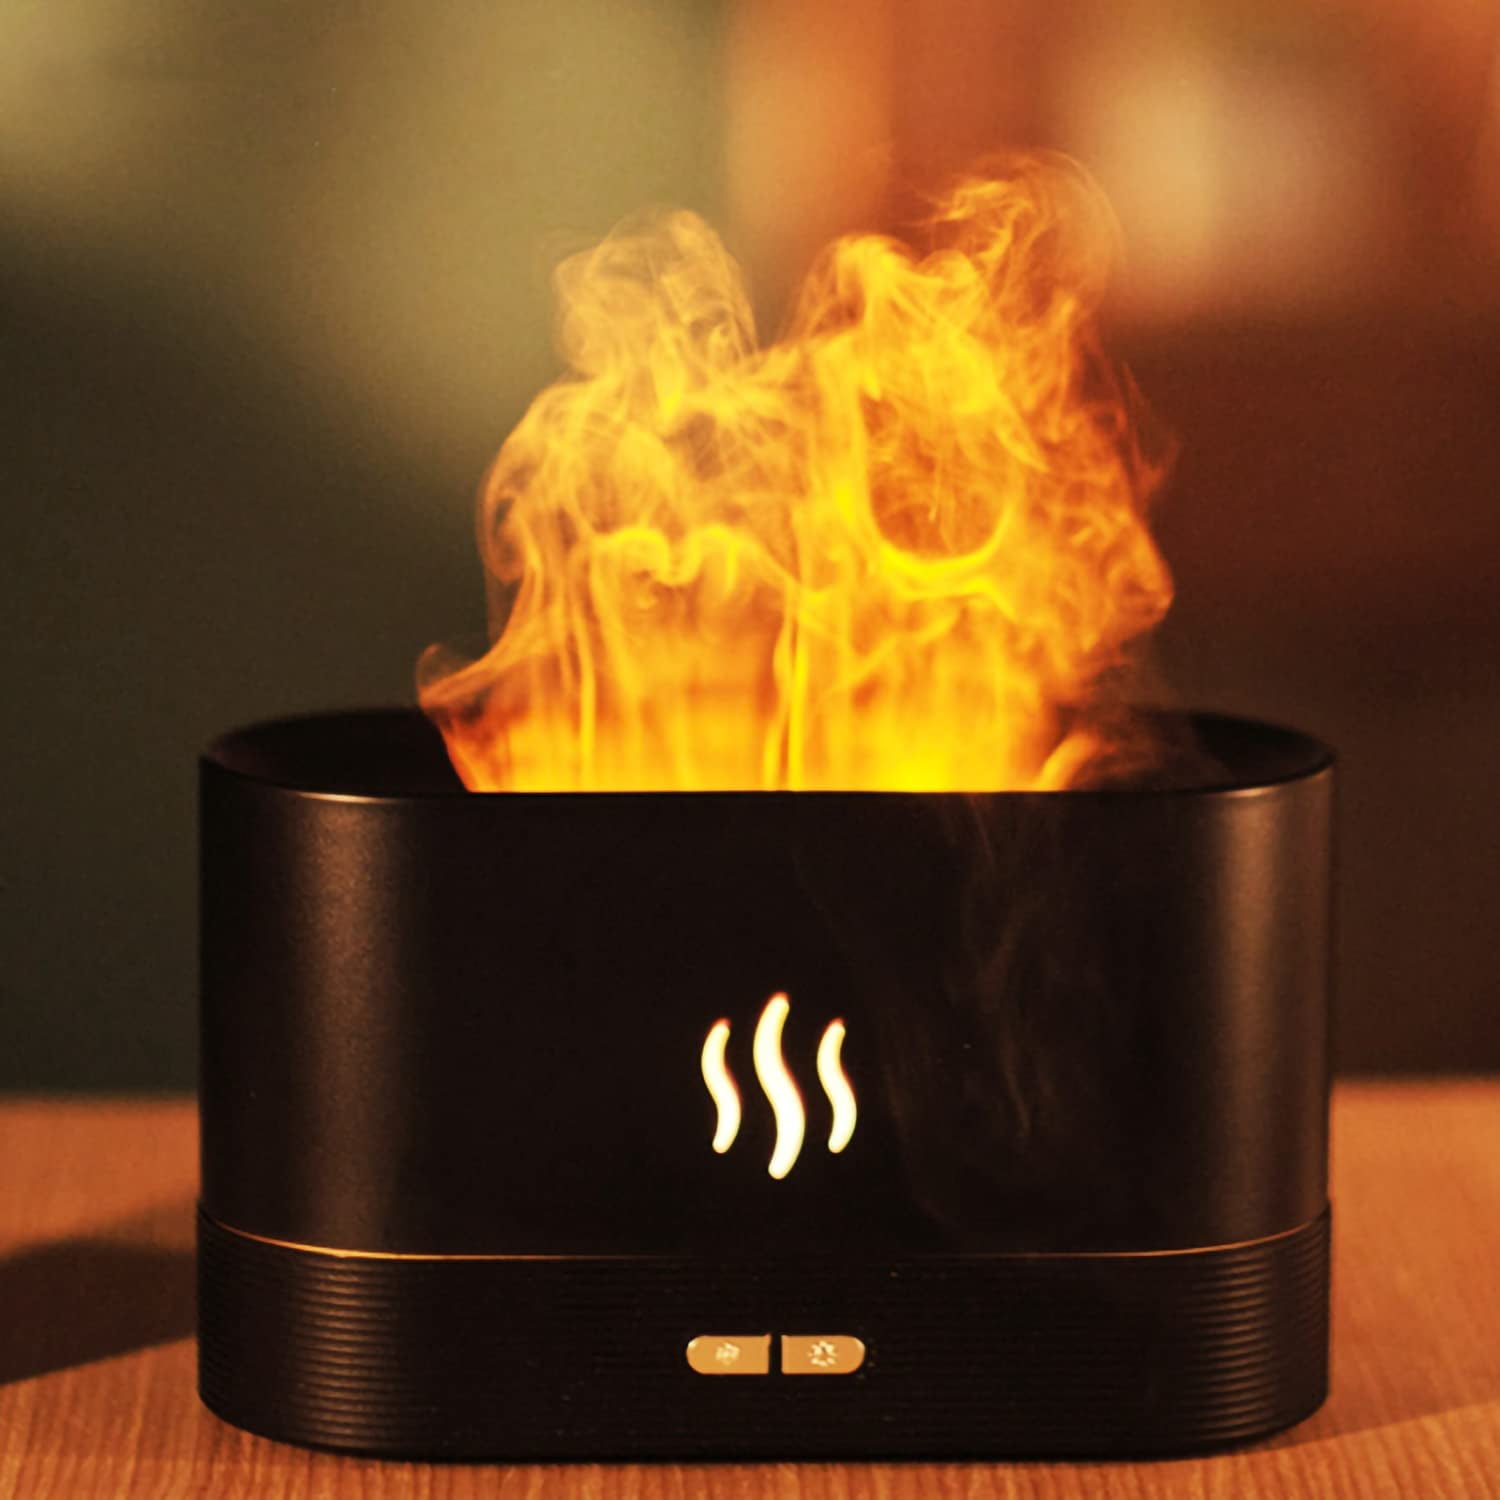 Flame Air Diffuser,Humidifier,Portable-Noiseless Aroma Diffuser